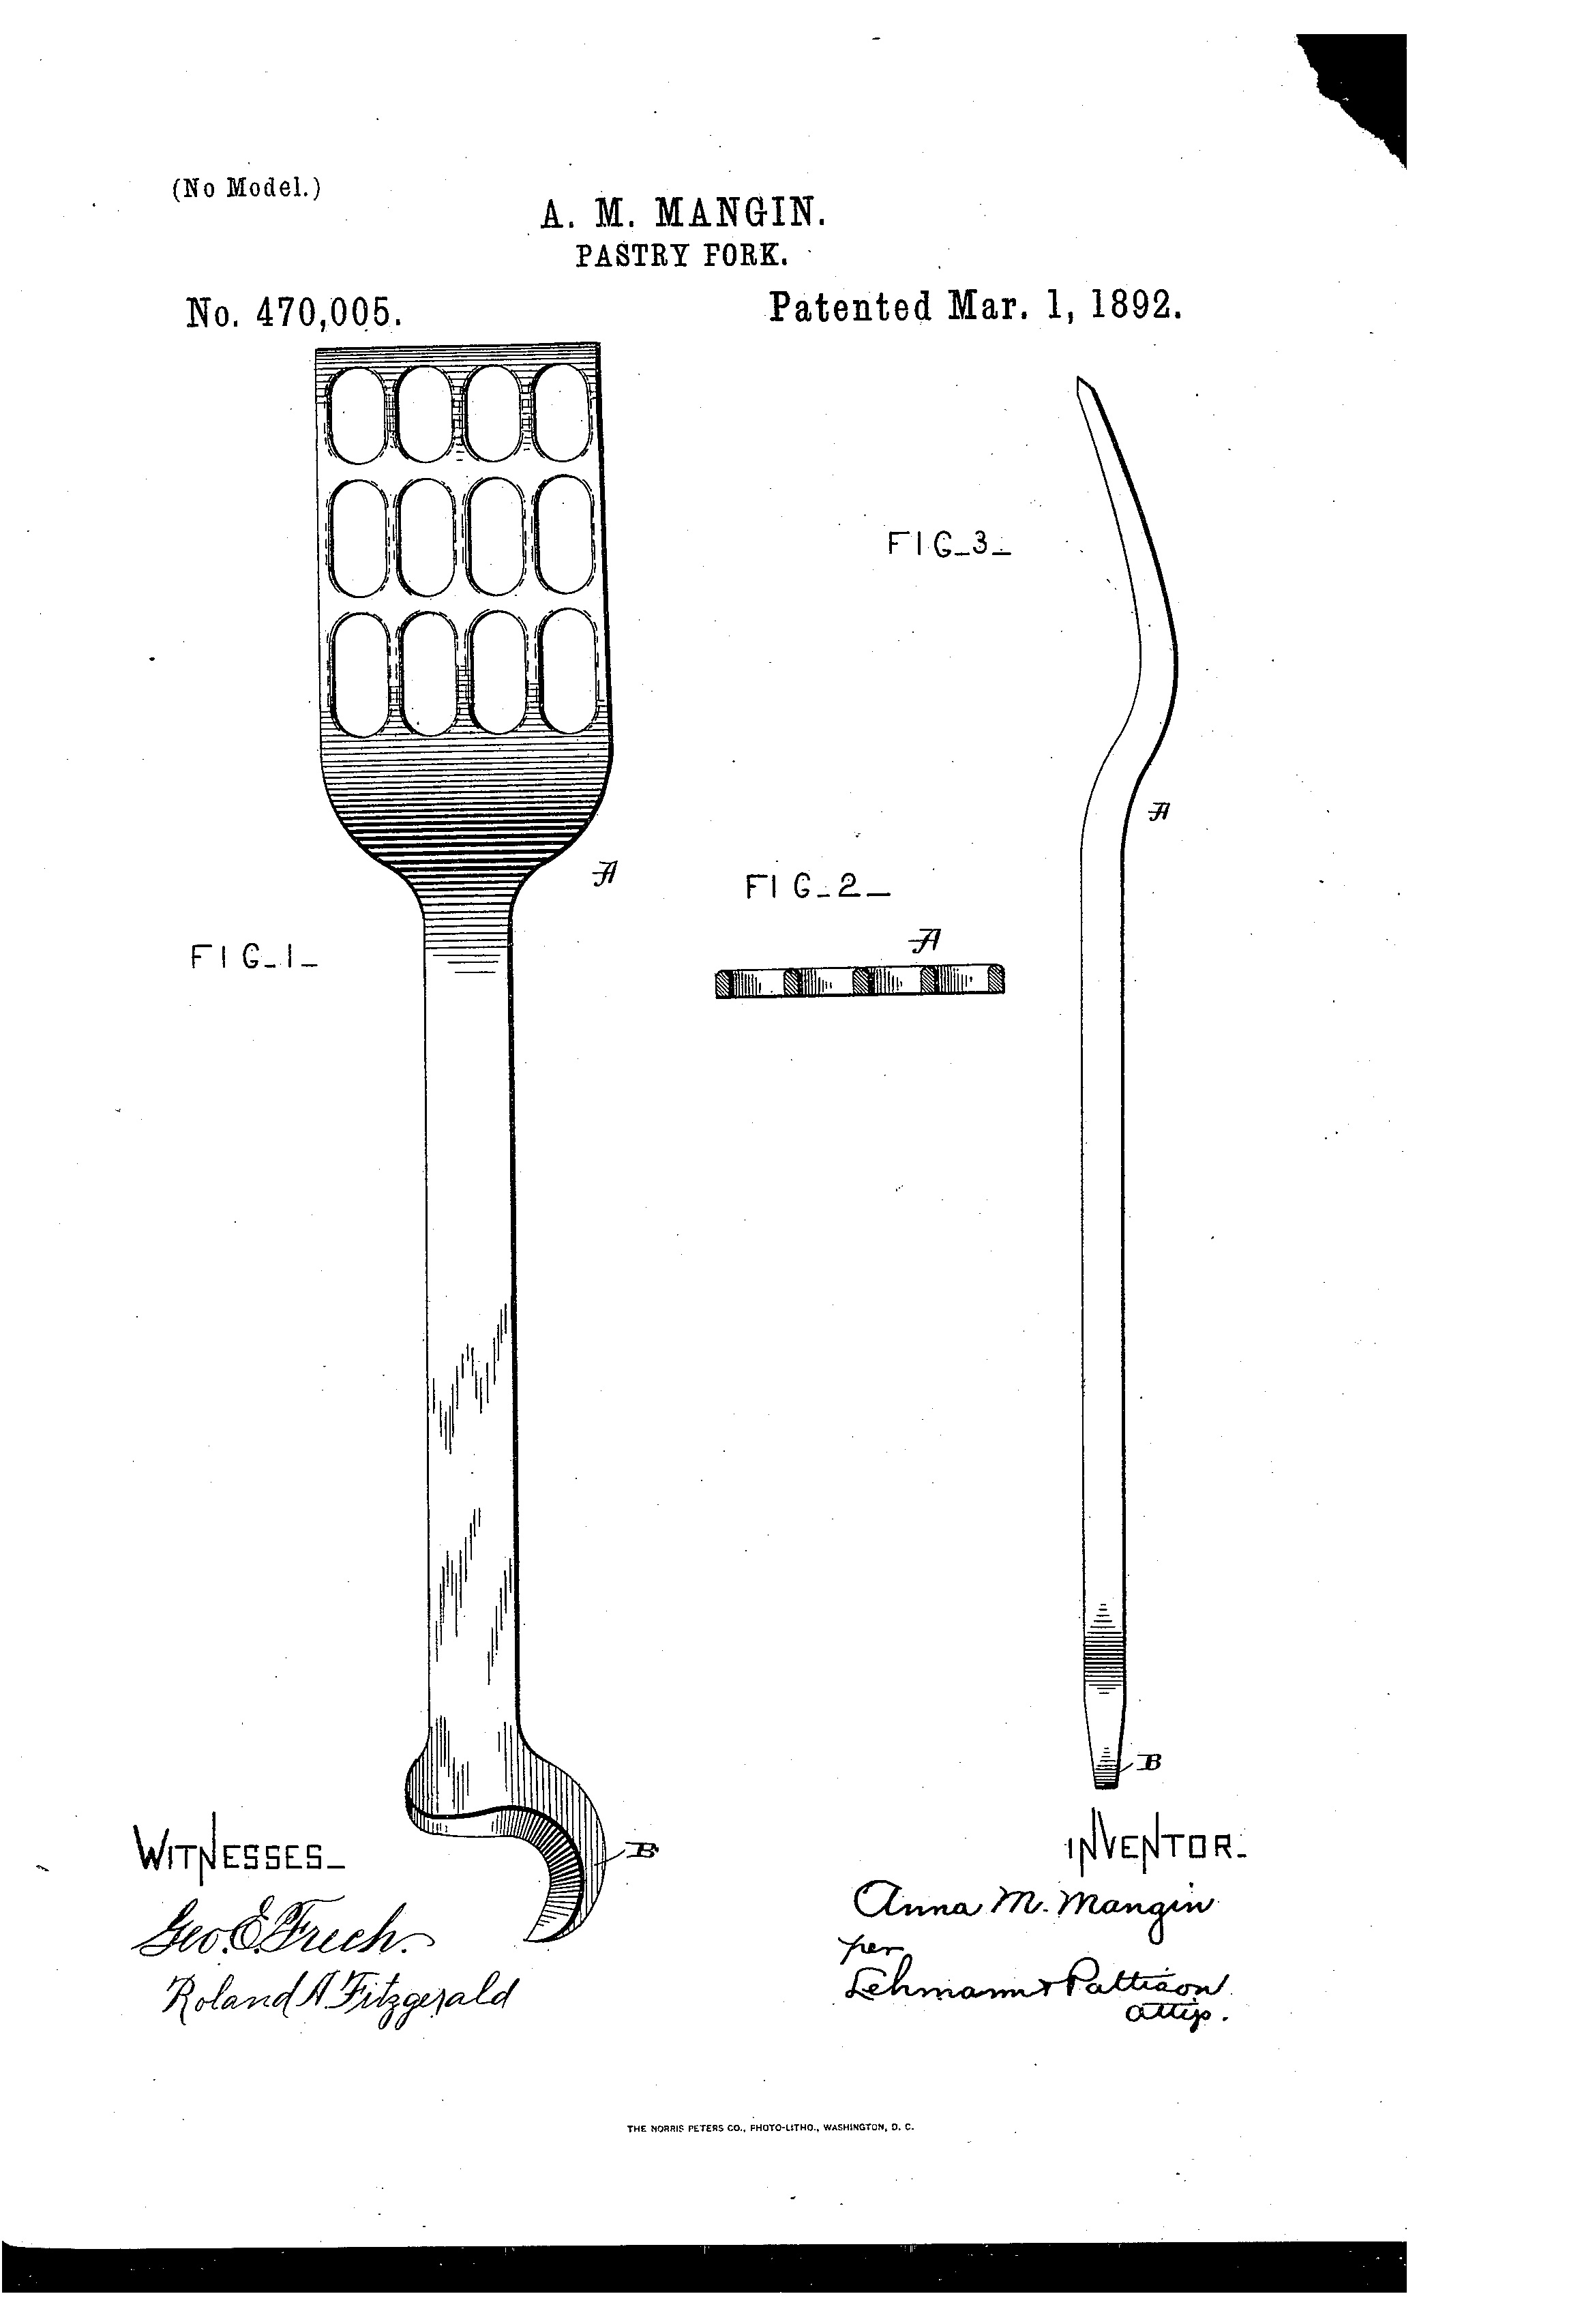 https://upload.wikimedia.org/wikipedia/commons/2/2a/Patent_US470005-drawings_Pastry_Fork_Anna_M_Mangin.jpg